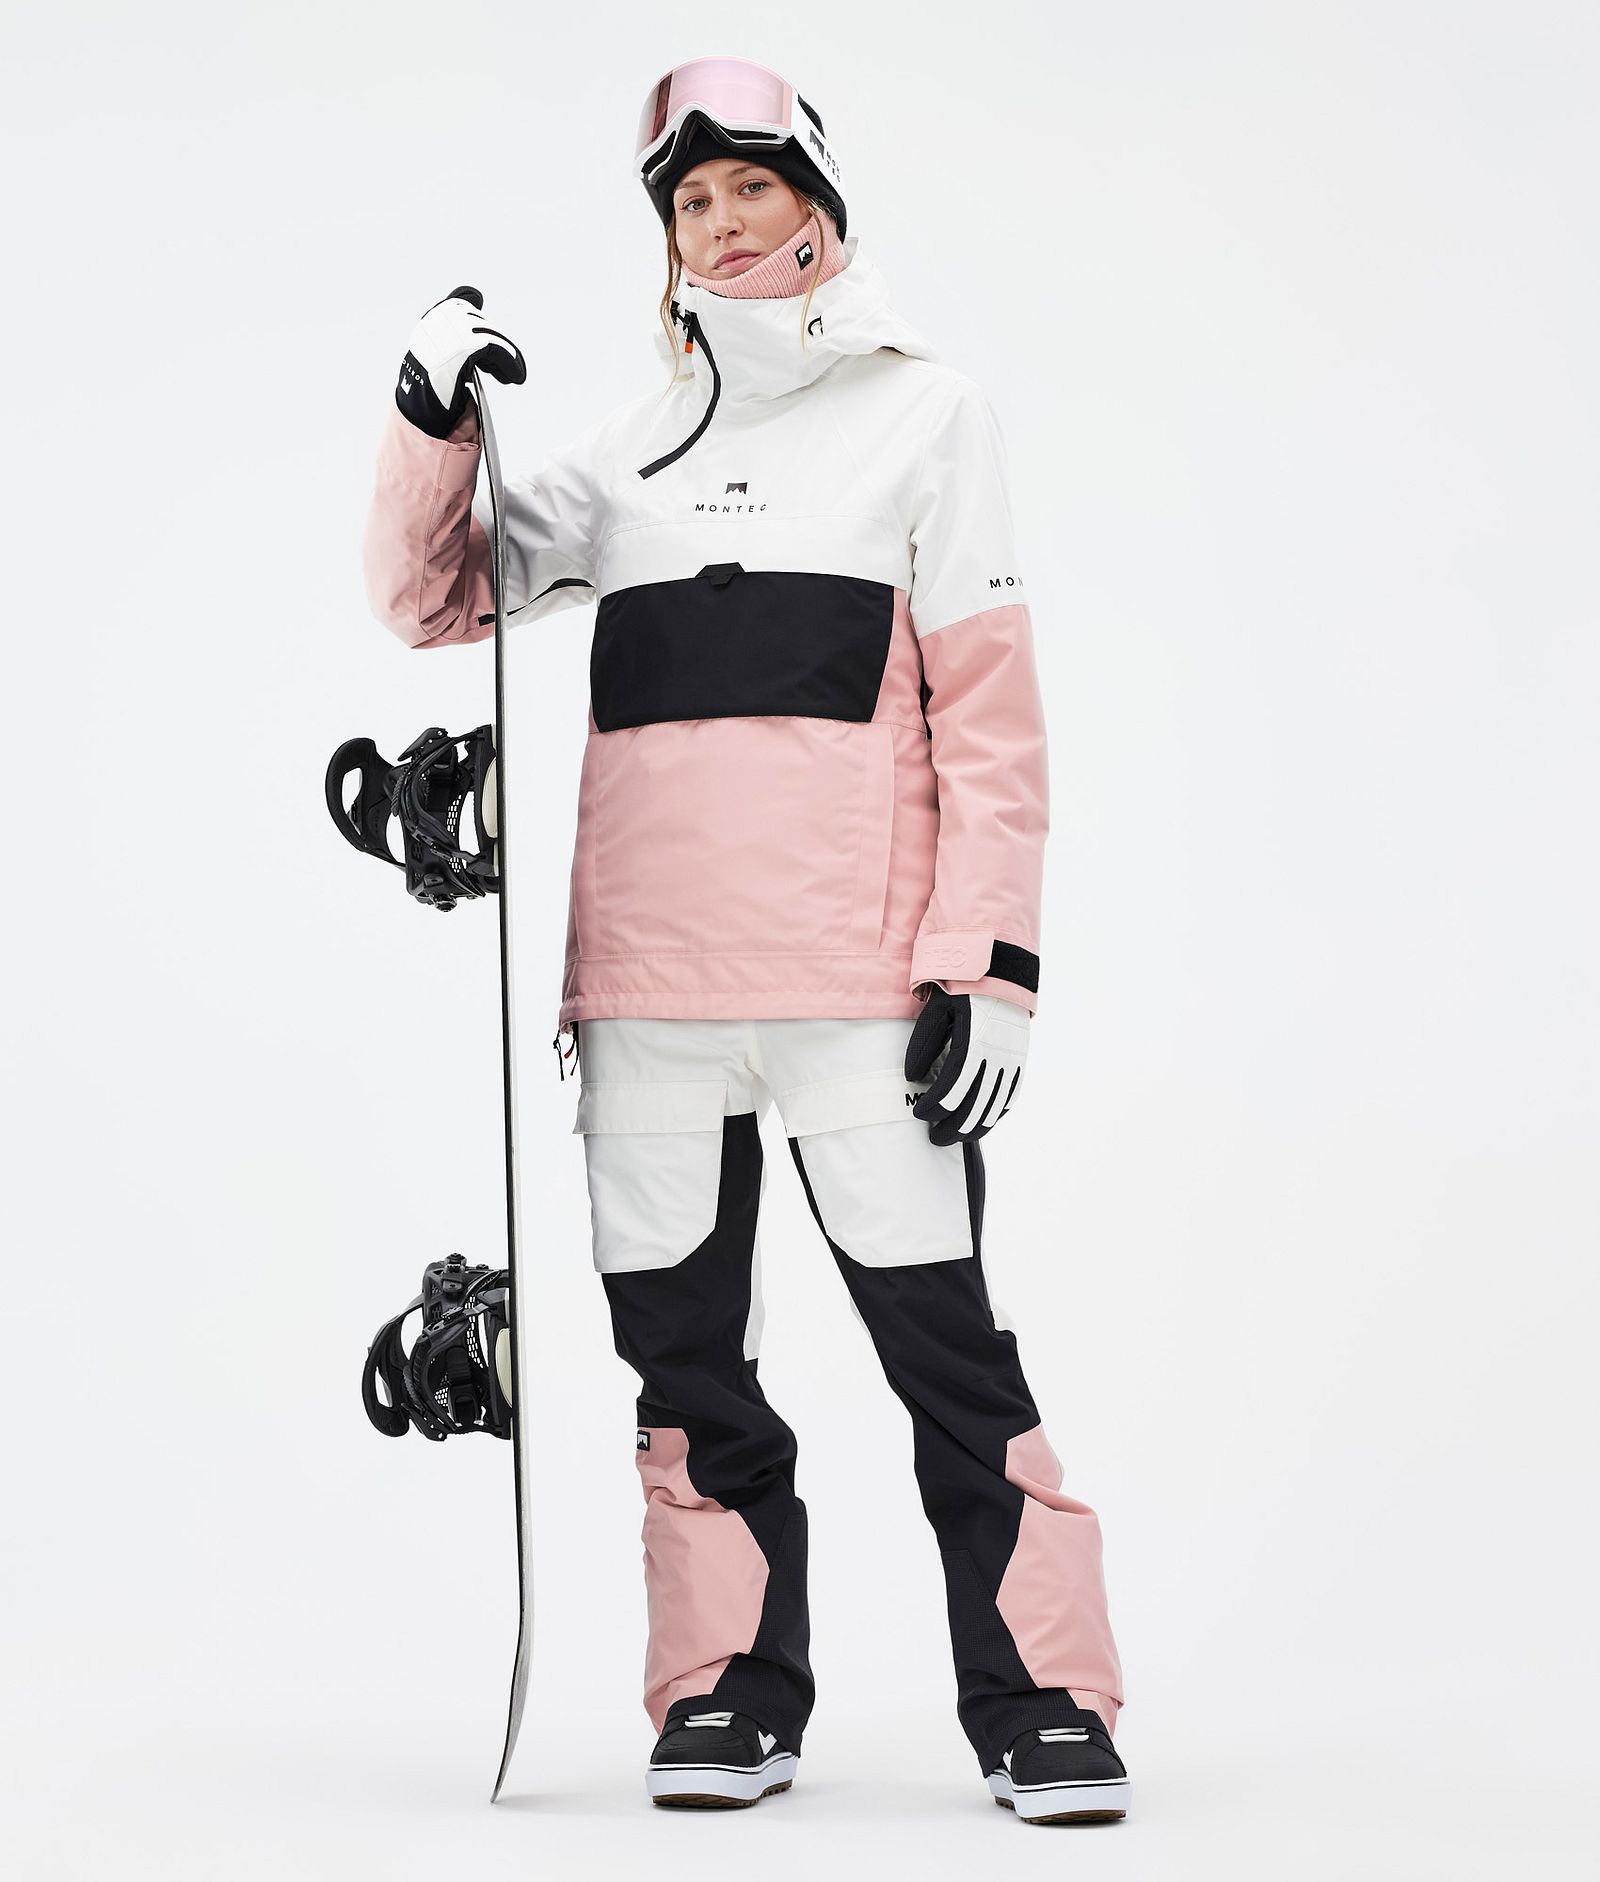 Dune W Snowboard Outfit Damen Old White/Black/Soft Pink, Image 1 of 2